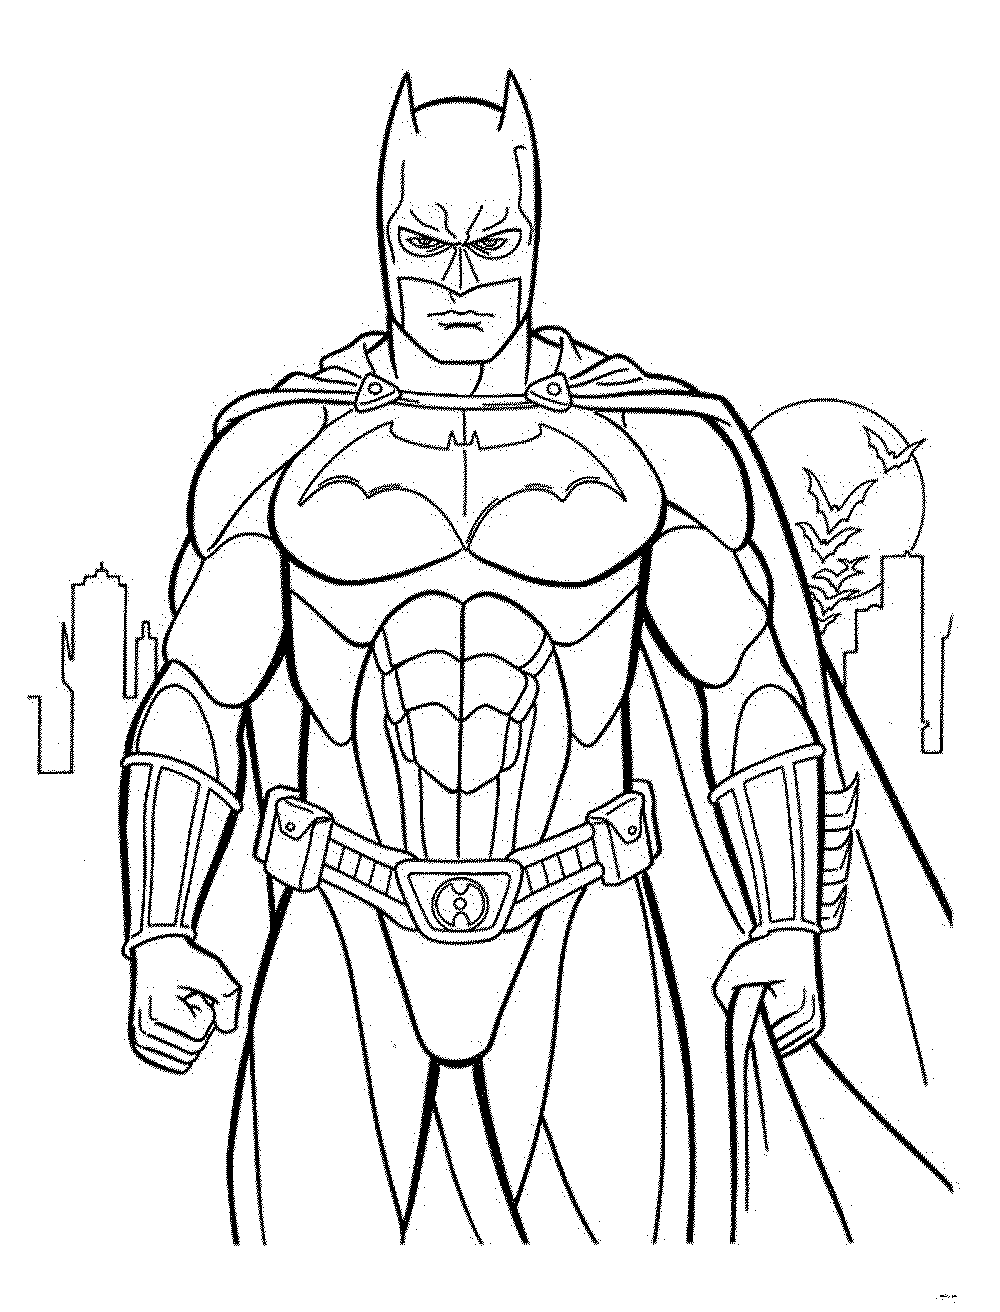 Print & Download - Batman Coloring Pages for Your Children